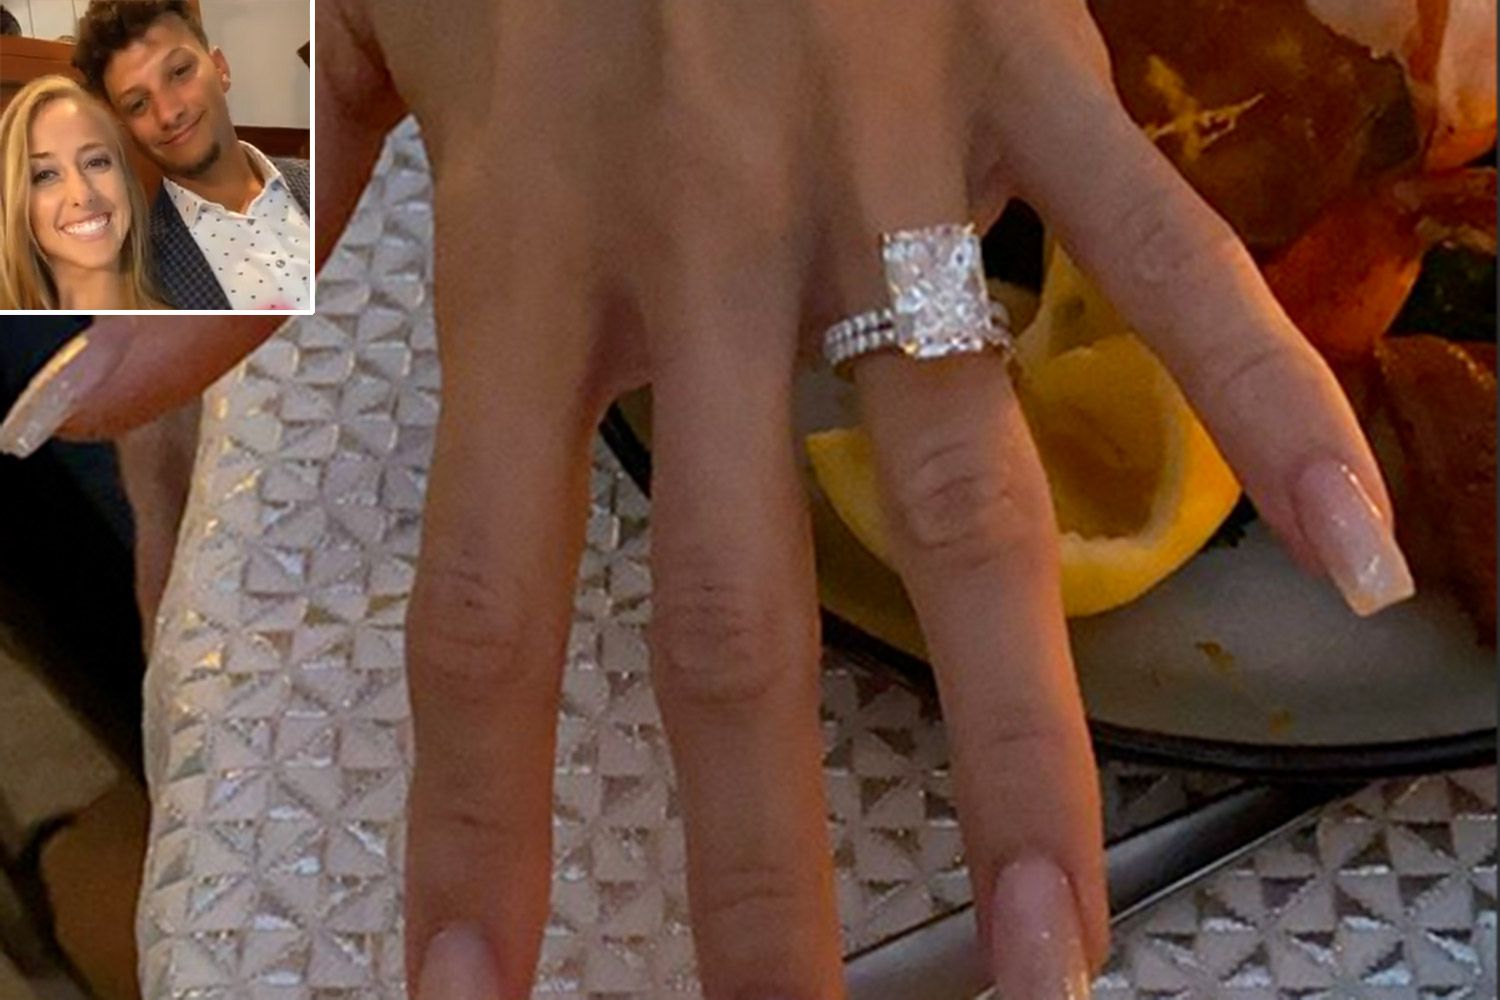 <p>The Super Bowl LIV MVP and his longtime girlfriend have made it official.</p>
                            <p>Mahomes, 24, popped the question on Sept. 1, revealing the happy news on his Instagram Stories with a photo of Matthews' stunning ring.</p>
                            <p>"Ring SZN," Mahomes wrote, adding a kissing face emoji and tagging his now-fianc&eacute;e.</p>
                            <p>Matthews, 25, shared some behind-the-scenes moments of the proposal on her own Instagram Stories, revealing a setup including roses and marquee lights that read "Will You Marry Me."</p>
                            <p>"This happened today," Matthews wrote on her Stories.</p>
                            <p>Another slide showed a beautiful candle-lit dinner table, on which Matthews added, "My heart is so full! I love this man so incredibly much and today was so so special!"</p>
                            <p>"Couldn't imagine this day being any more perfect," the former pro soccer player added.</p>
                            <p>Mahomes and Matthews, who now runs her own fitness company called Brittany Lynn Fitness, met while attending Whitehouse High School in Whitehouse, Texas. The couple even attended prom together in 2013.</p>
                            